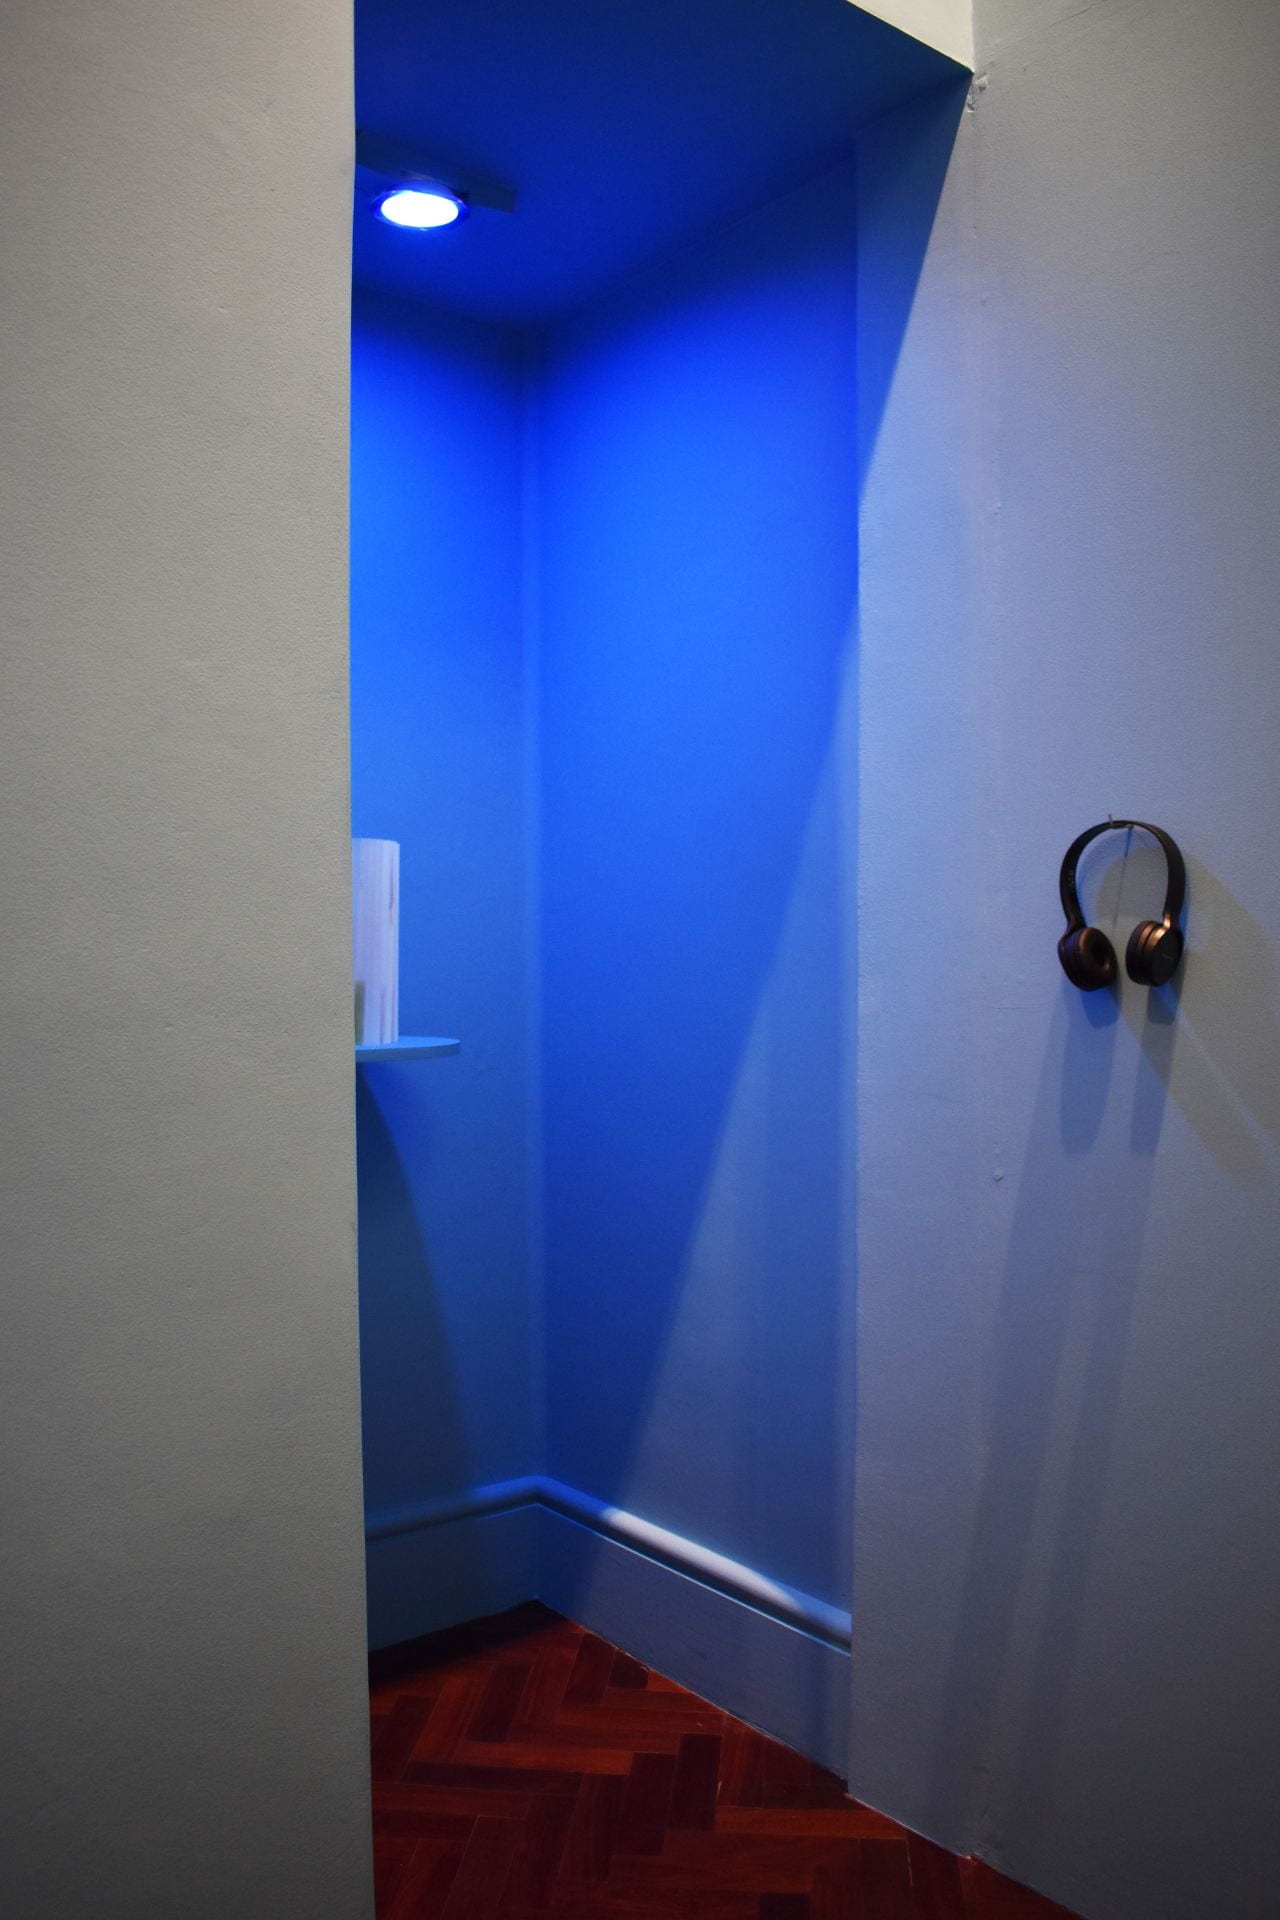 A tall booth space painted in light blue, with blue light shining down inside. A pair of headphones can be seen hanging on a hook on the right-hand wall.